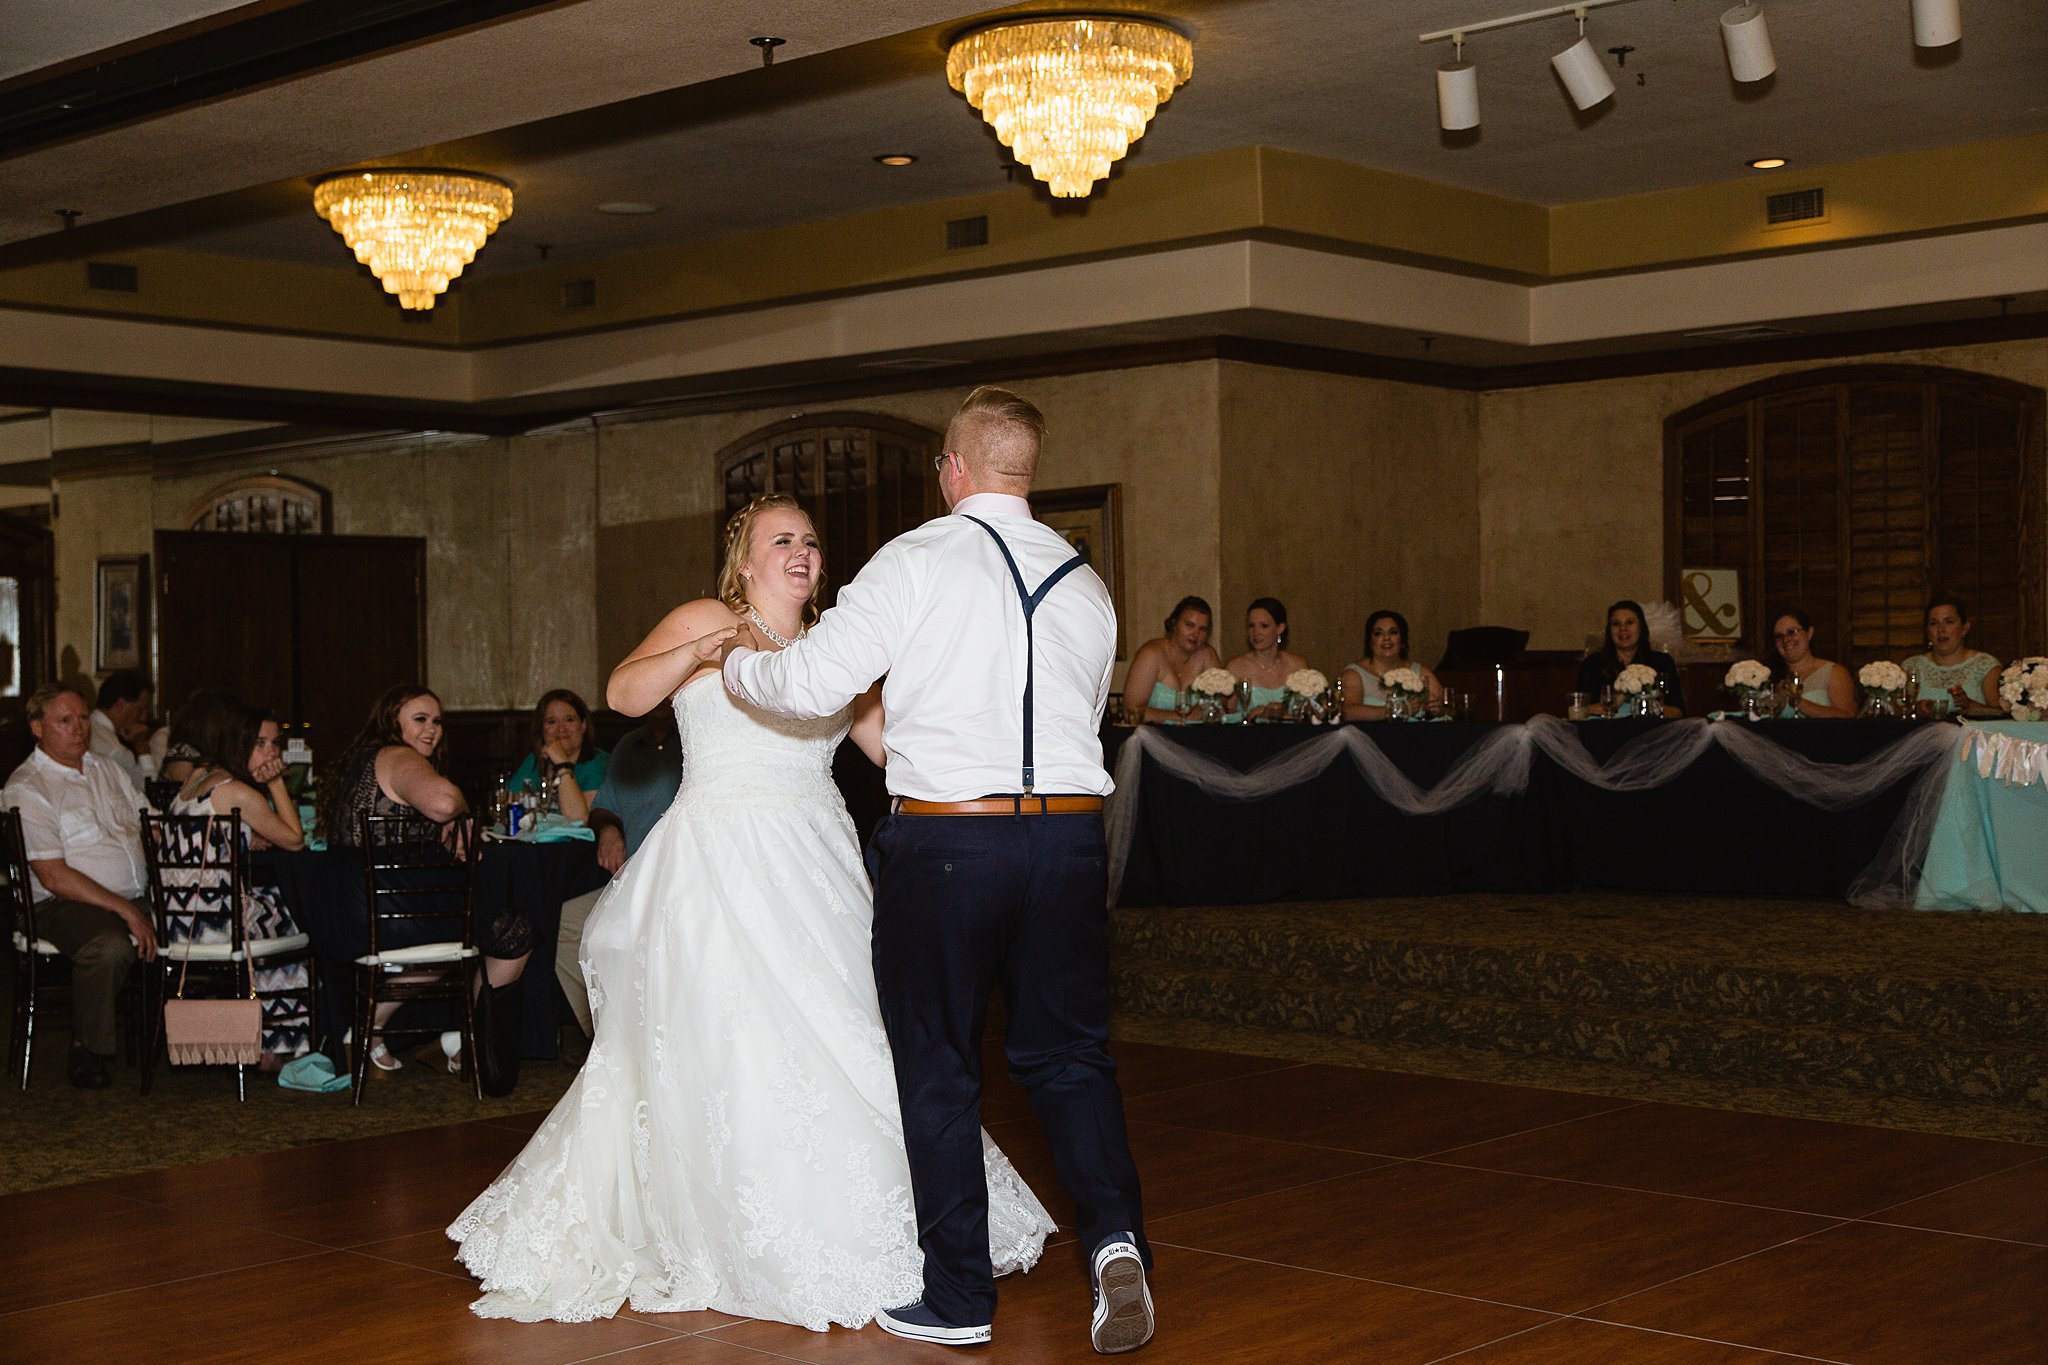 Bride and groom sharing first dance at their Val Vista Lakes wedding reception by Arizona wedding photographer PMA Photography.